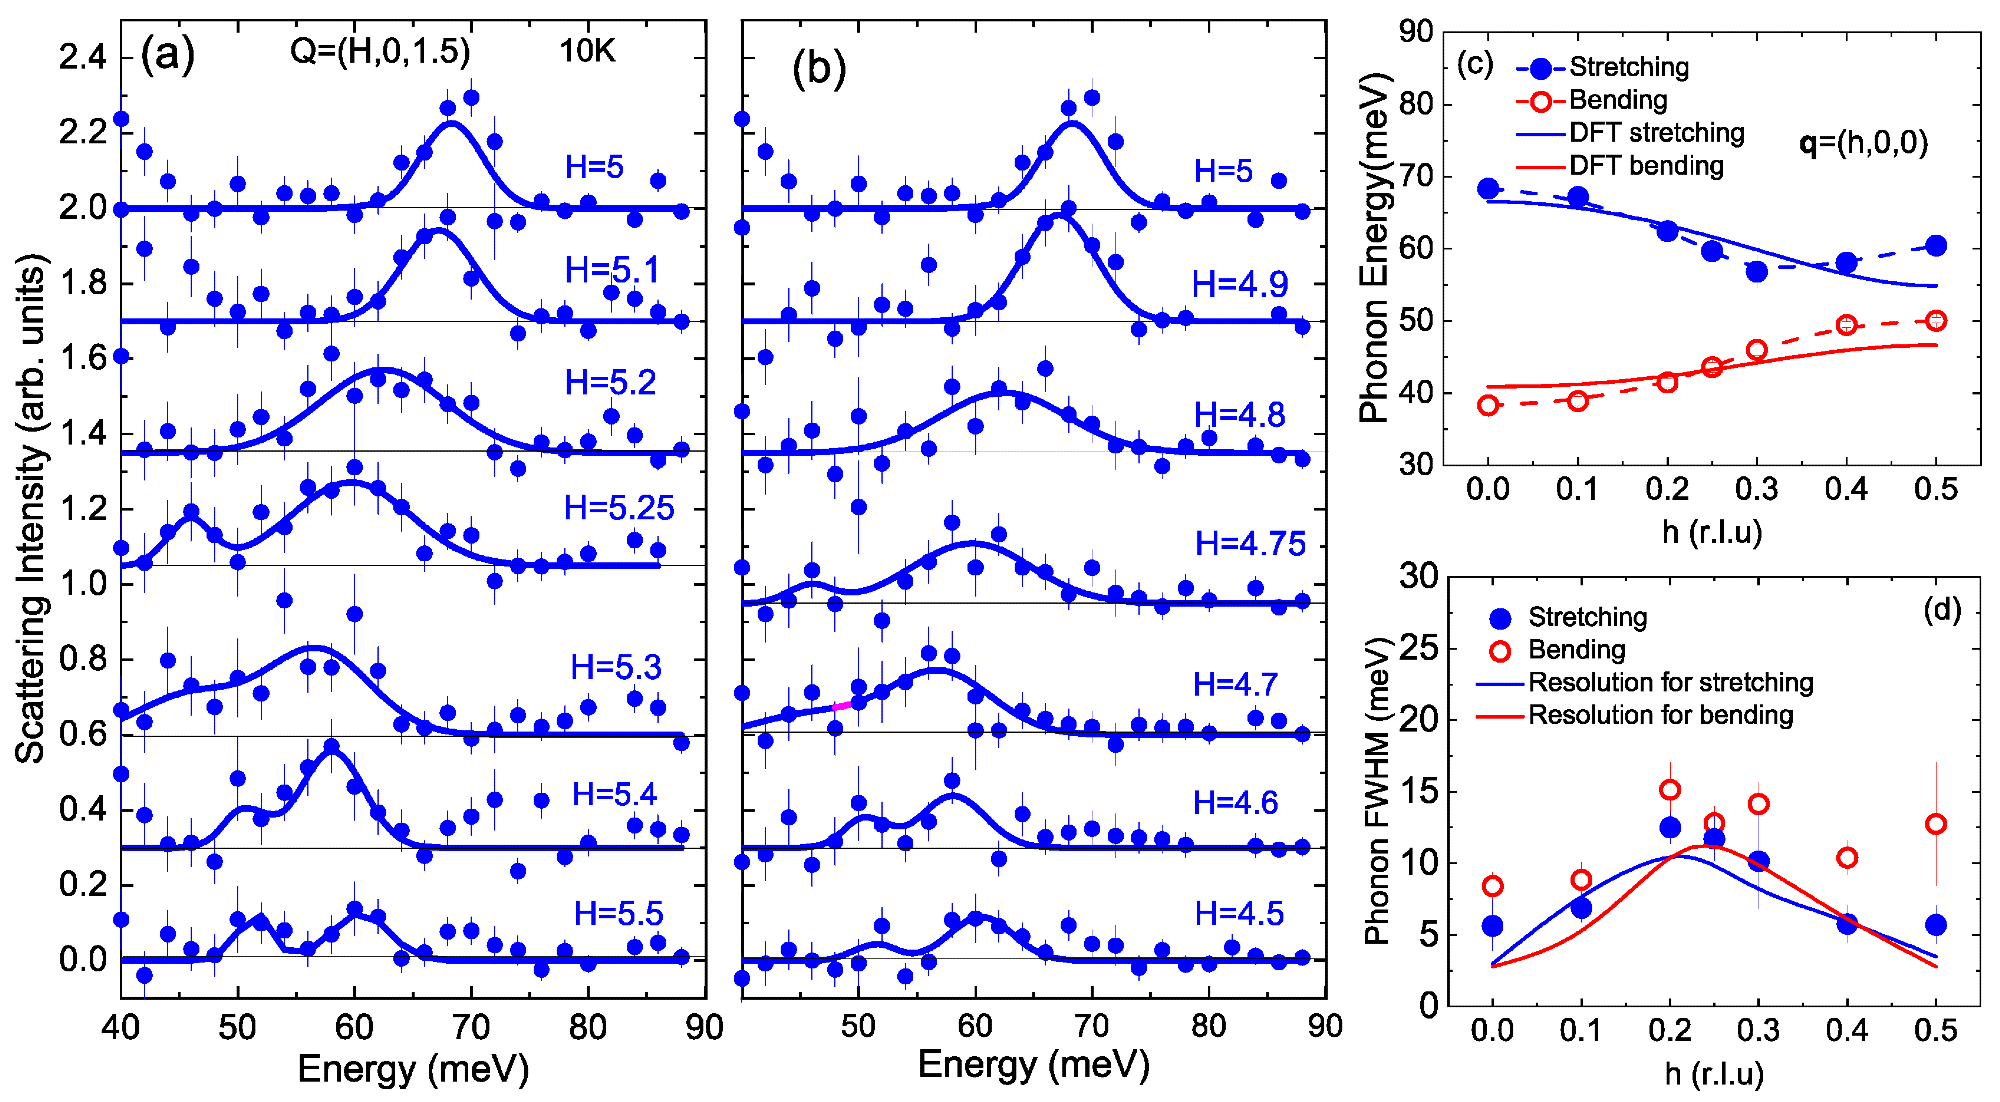 Cu-O bond-stretching and bond-bending longitudinal phonon dispersion along [100]. (a, b) Background-subtracted data at wavevectors with large bond-stretching phonon structure factor and small bond-bending structure factor. Binning: ?H = ±0.07, ?K = ±0.08, and ?L = ±3.5. (c) Dispersions of the bond-stretching (blue) and bond-bending phonon branches (red). For the bond-stretching phonon peaks, the multizone fit was made to the data at each q in the two zones shown in (a, b). The bond-bending (lower) branch peak positions were fixed to the values obtained based on wavevectors adjacent to (4, 0, 0), (4, 1, 0), and (4, -1, 0). (d) Raw-data peak widths (FWHM) extracted from the same fits as in (c). The effective resolution width increases when the dispersion is steeper.